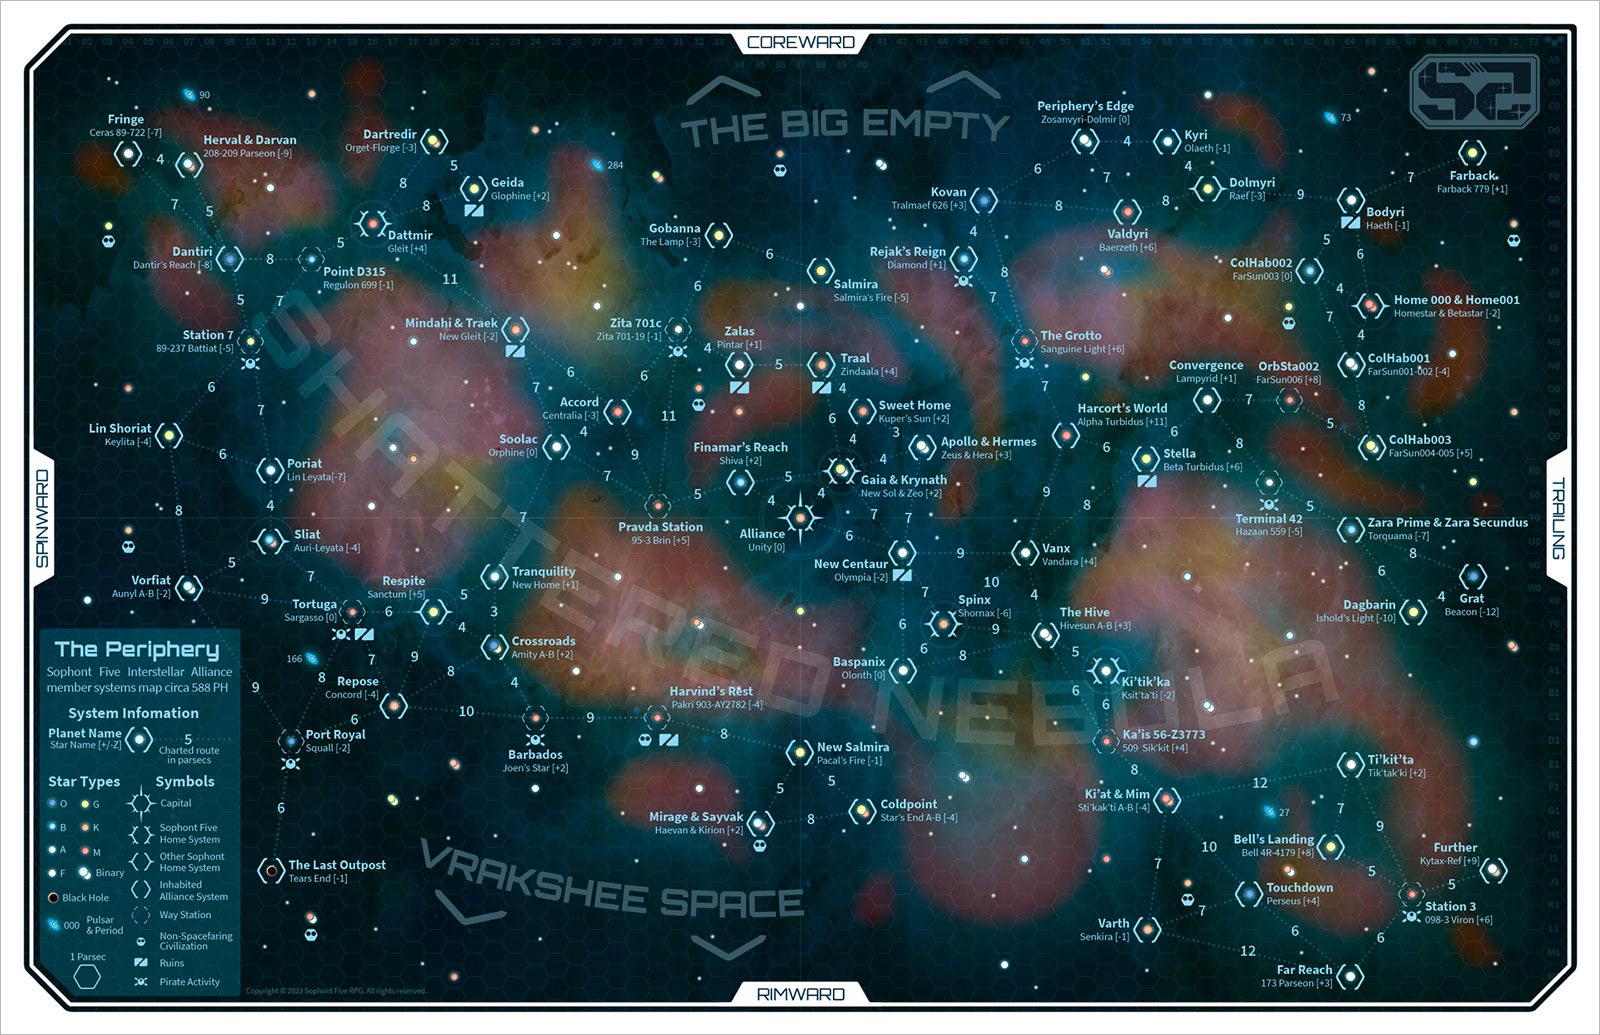 The Periphery Star Map